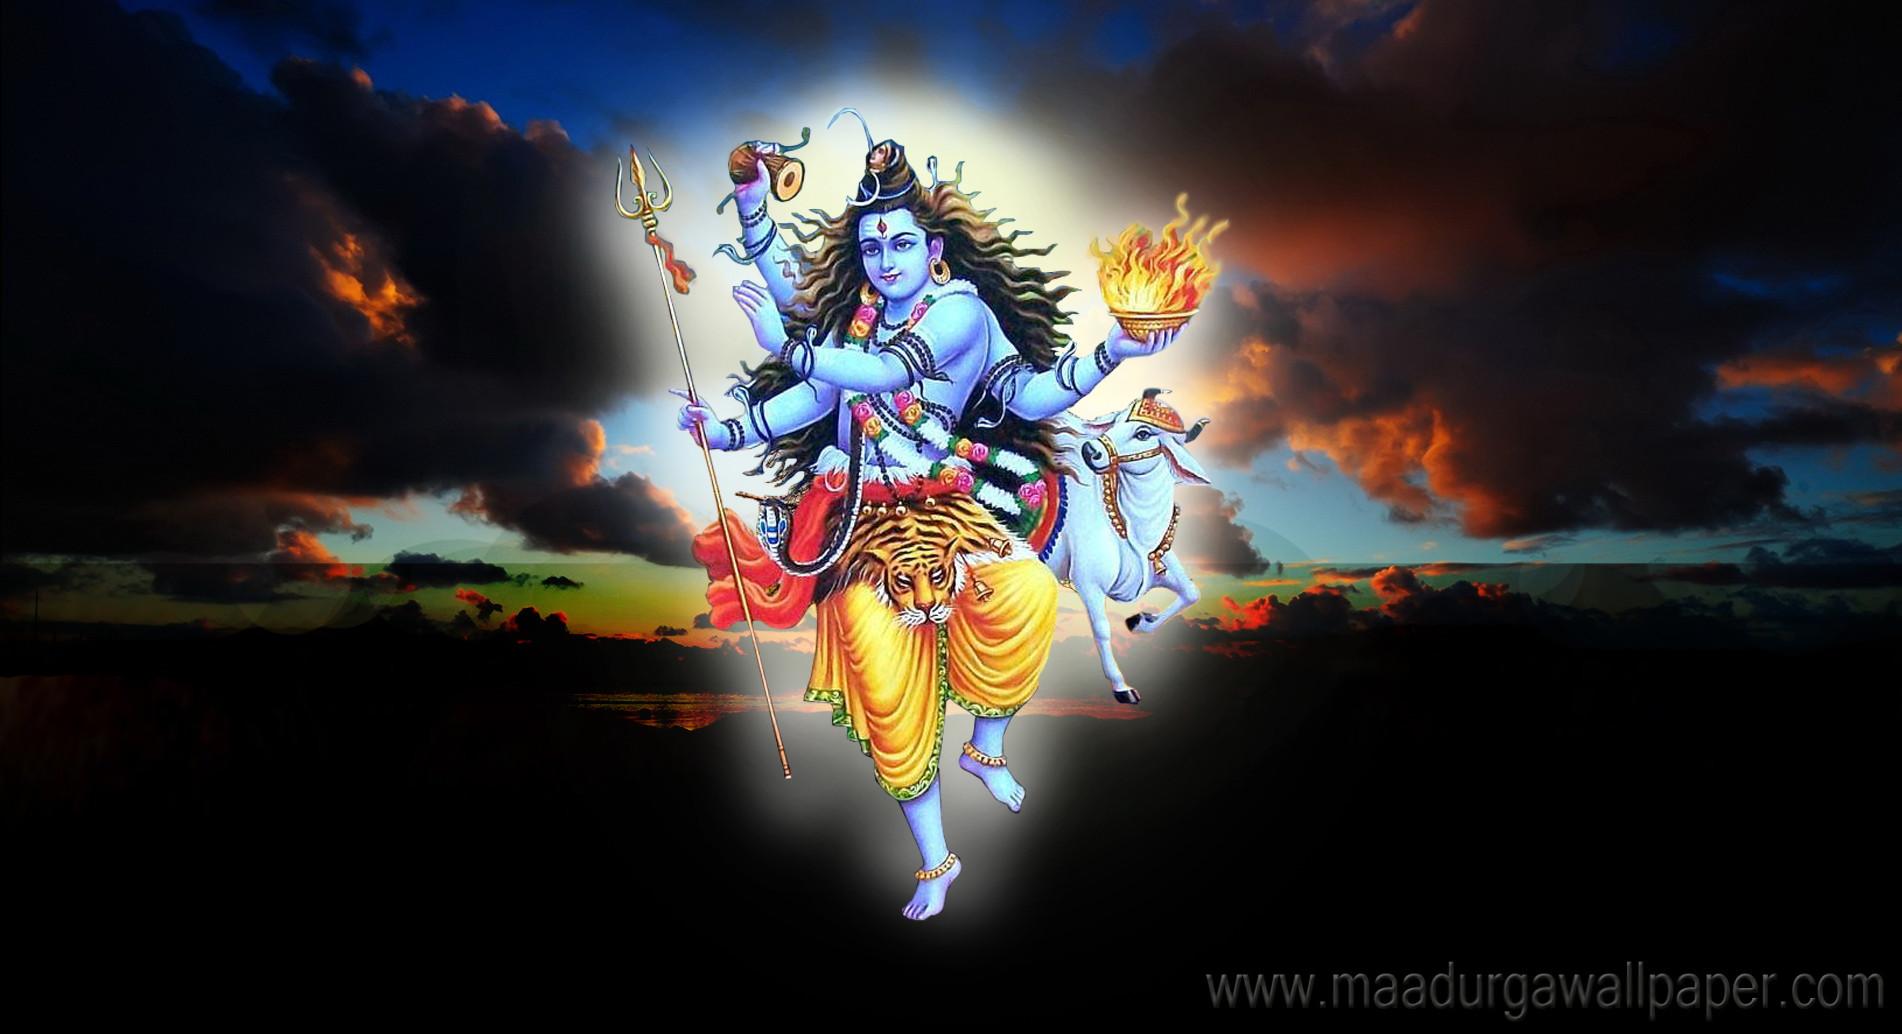 Lord Shiva Rudra Wallpaper Download The Galleries of HD Wallpaper